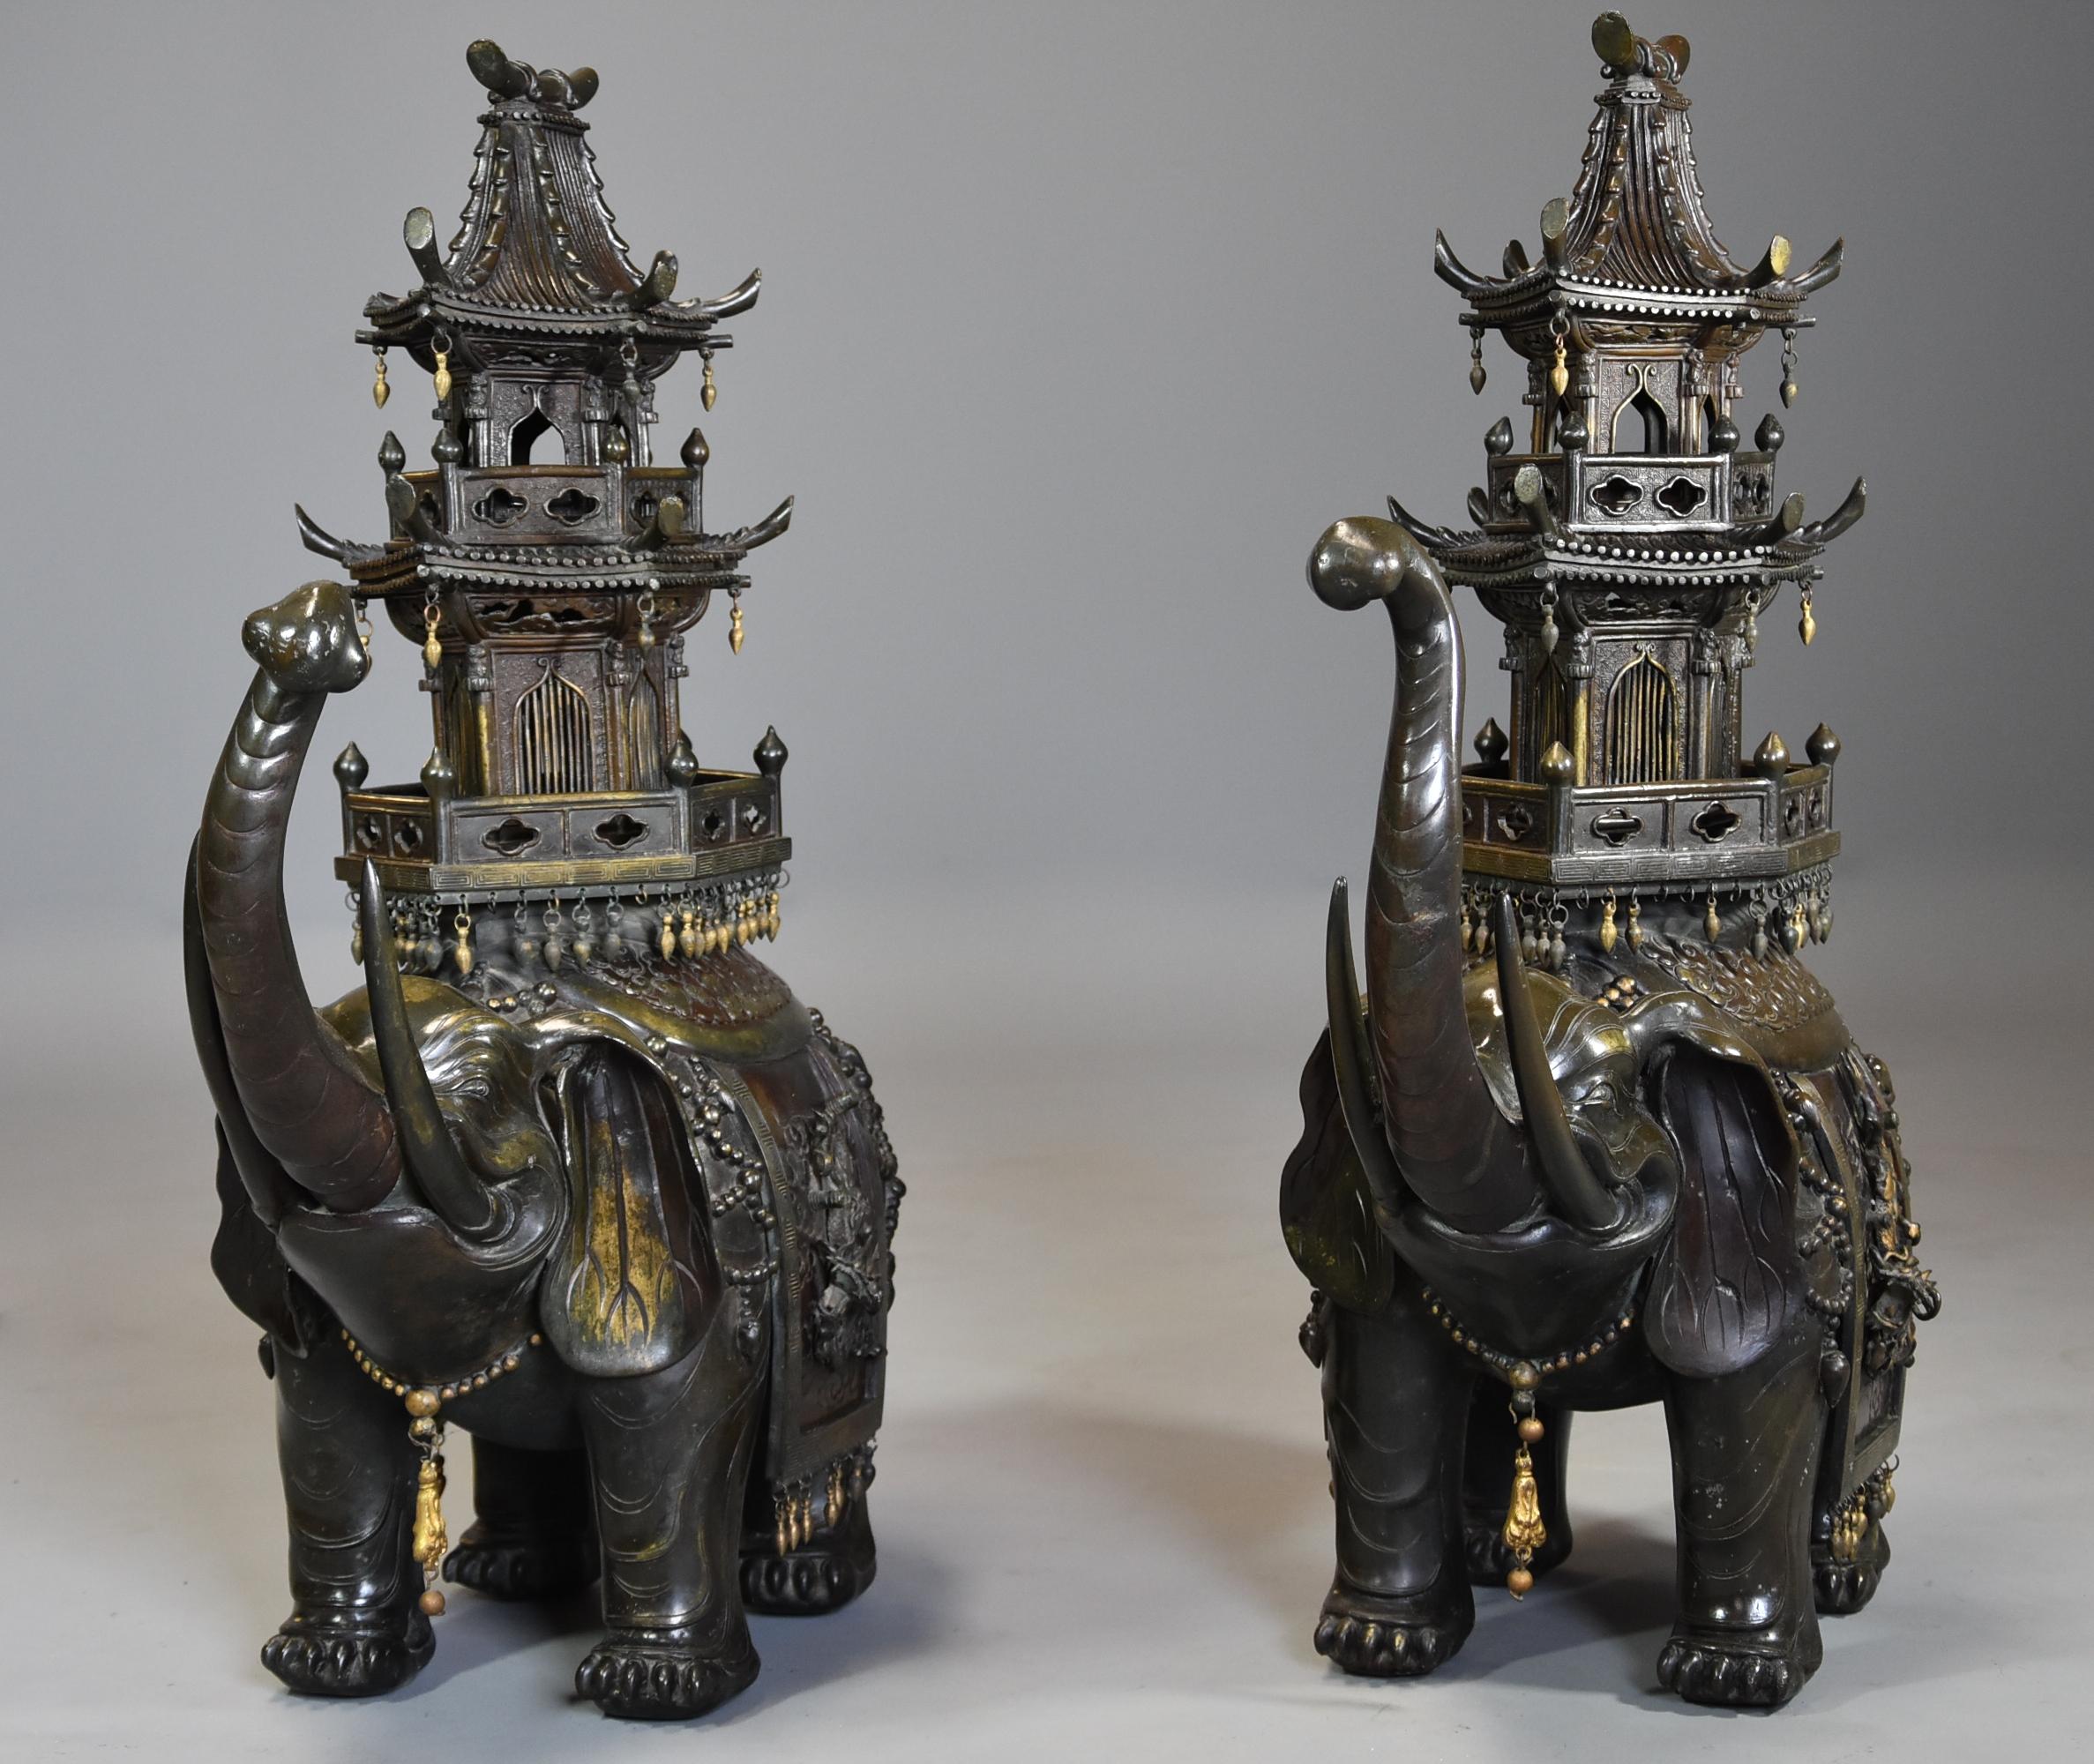 Pair of Large 19th Century Japanese Meiji Bronze Elephant Incense Burners For Sale 3